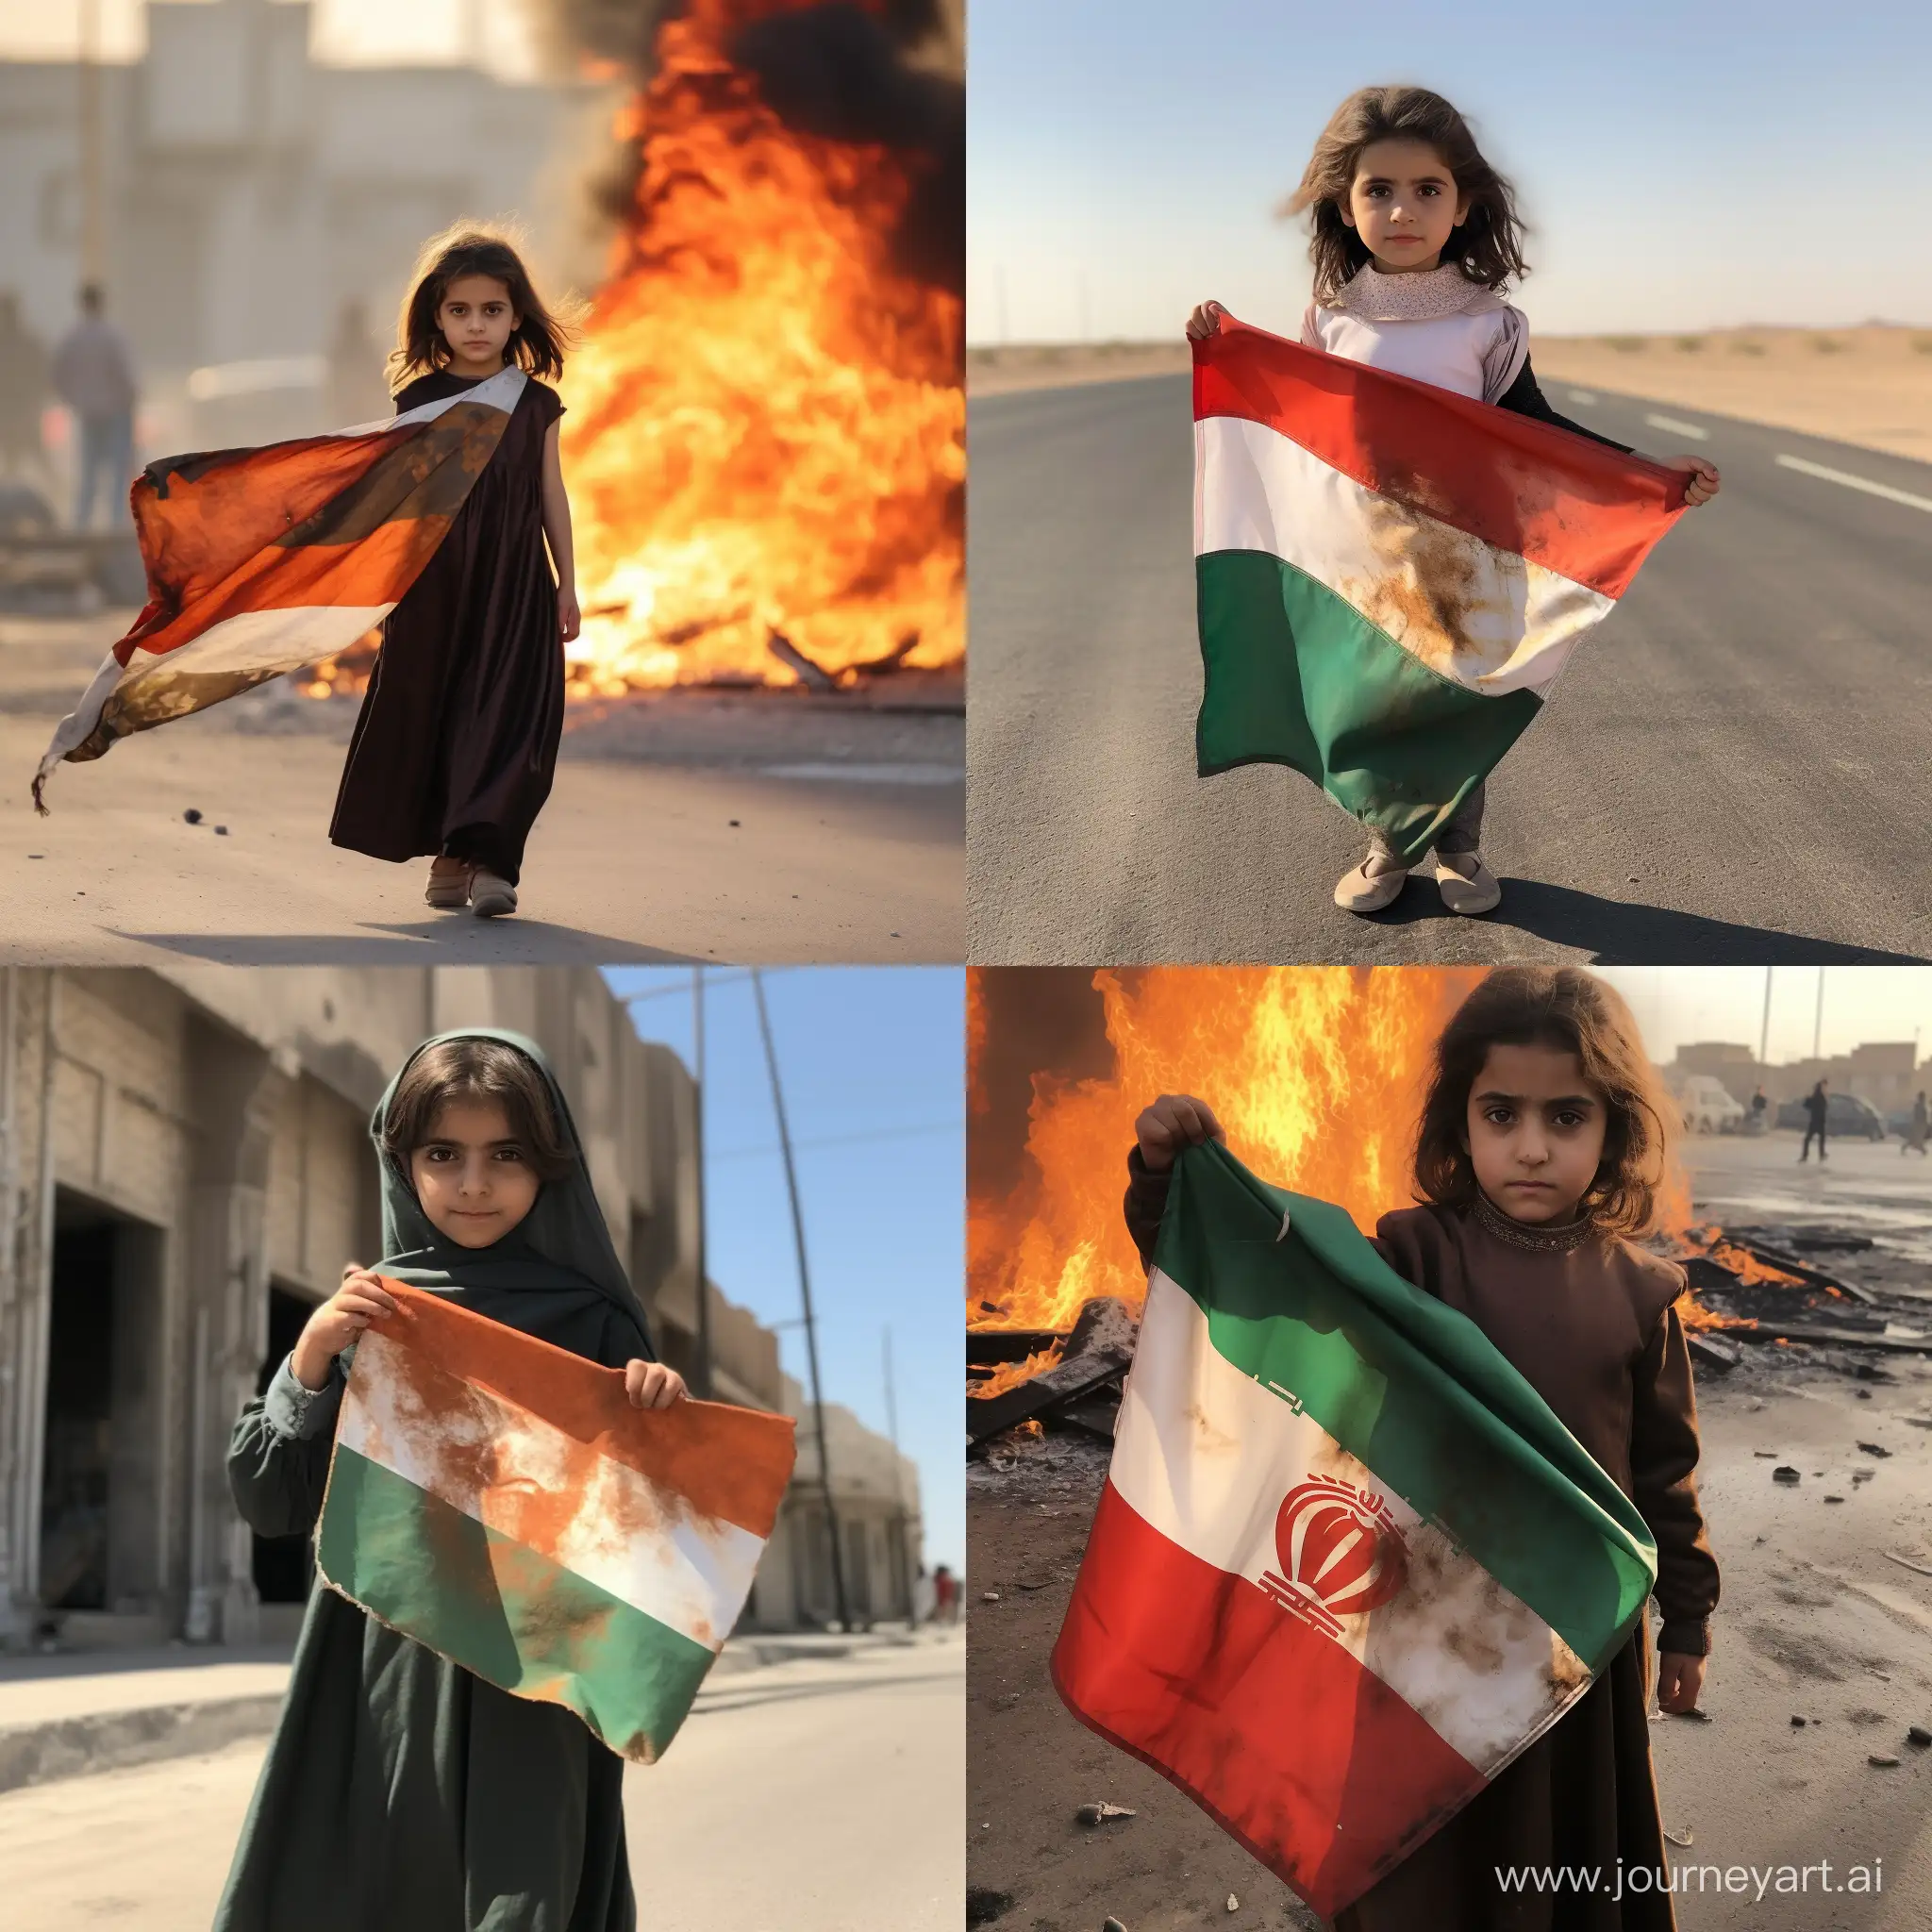 A 6-year-old girl with a red, white, and green flag of Iran in her hand caught fire in the street and the people of Kerman province of Iran fled